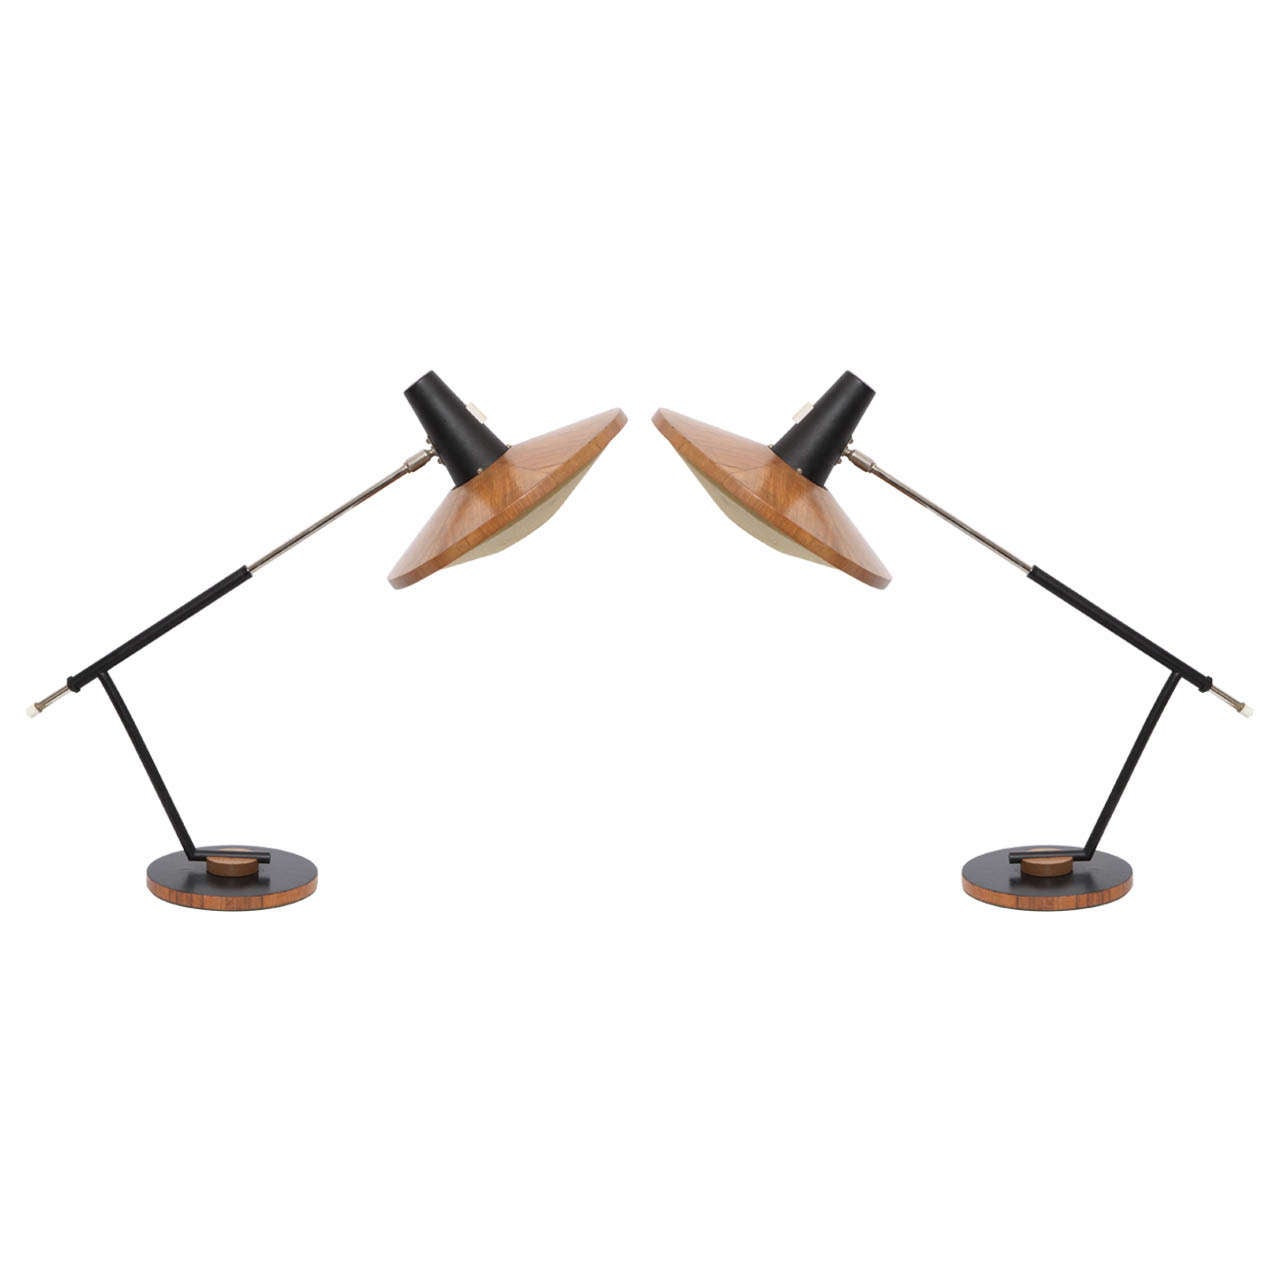 A Pair of 1950's German  Articulated Table Lamps